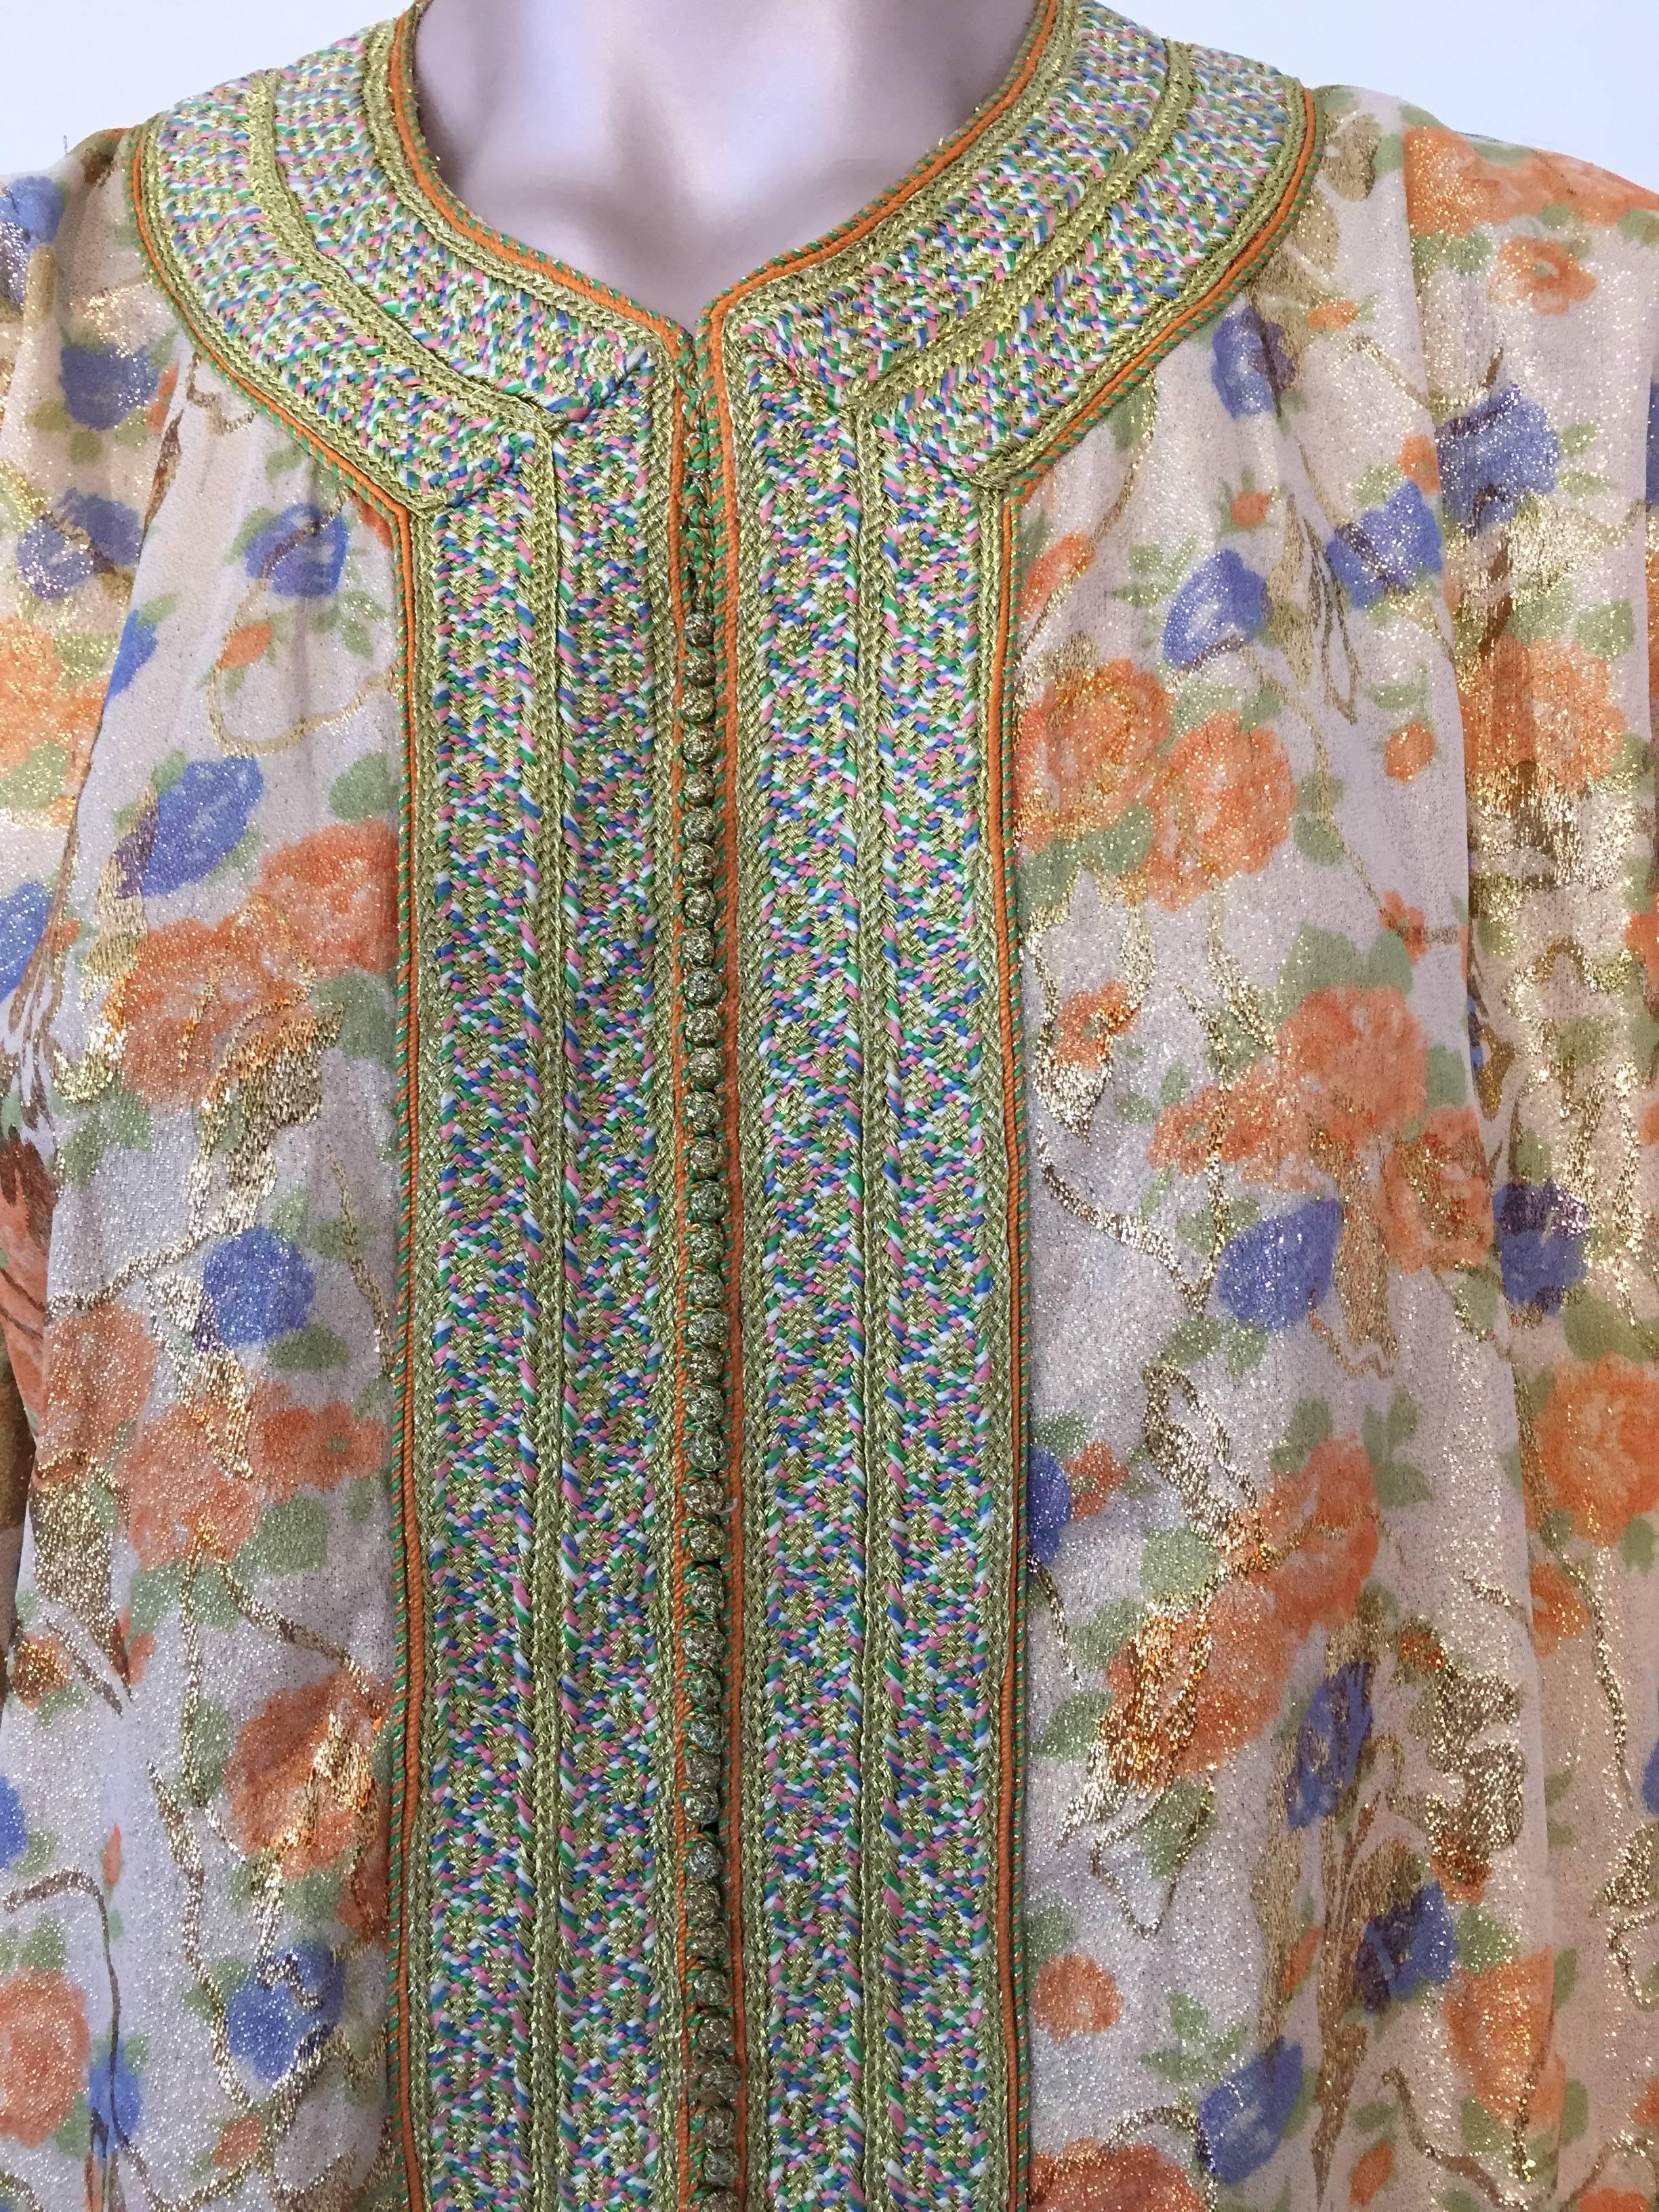 Moroccan Brocade Floral Kaftan Gown Maxi Dress In Good Condition For Sale In North Hollywood, CA